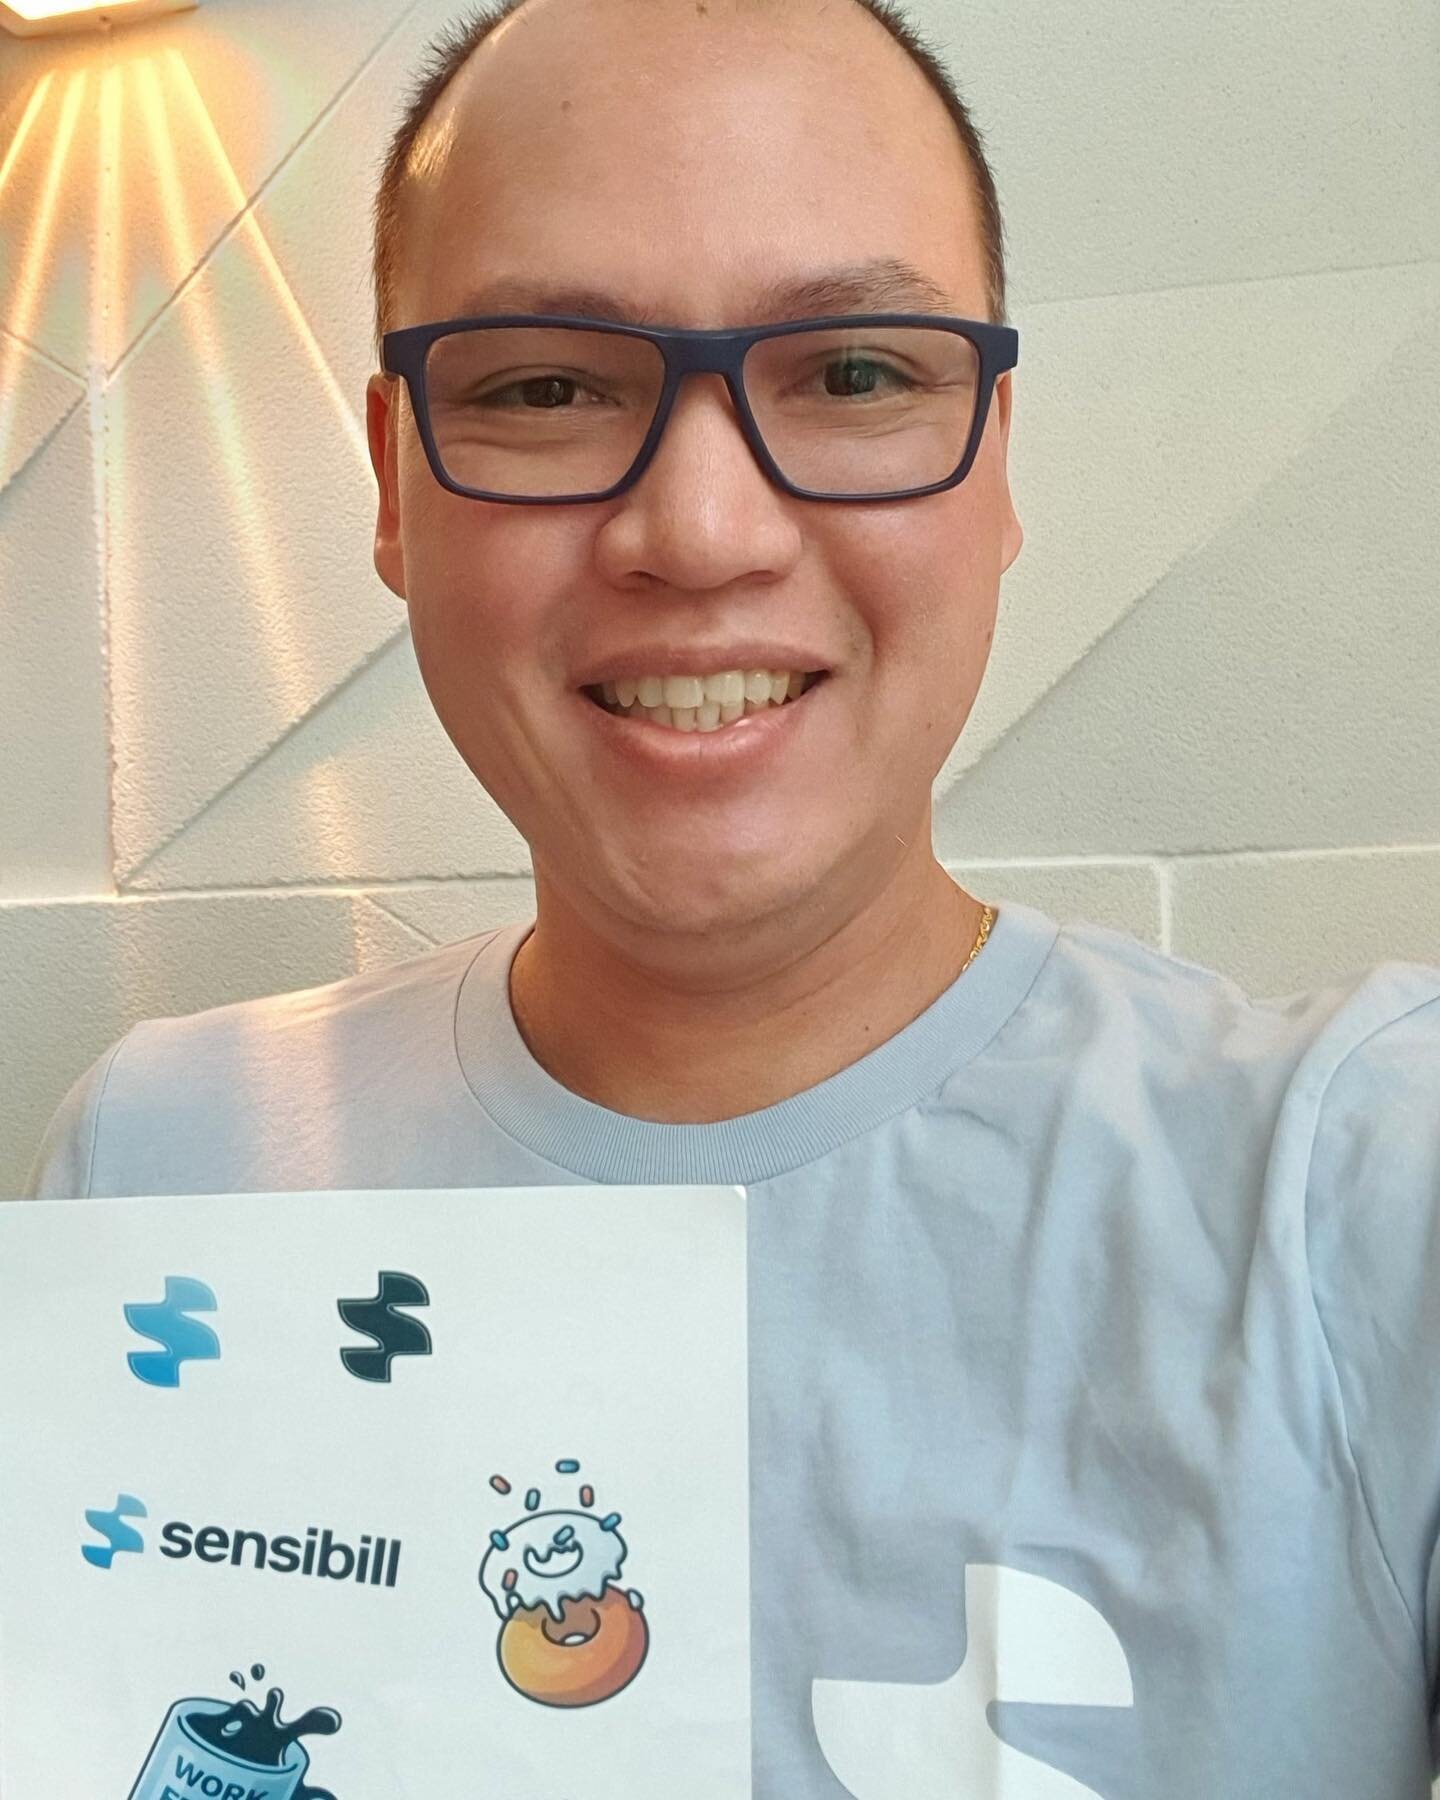 Meet Fabio Yamada, our Senior API Engineer in Backend. Two weeks in and Fabio is rocking the Sensibill Swag 🥰. Welcome to the team and looking good, Fabio! If you&rsquo;re interested in joining him, check out our Careers page in our bio. 
.
.
.
#hir